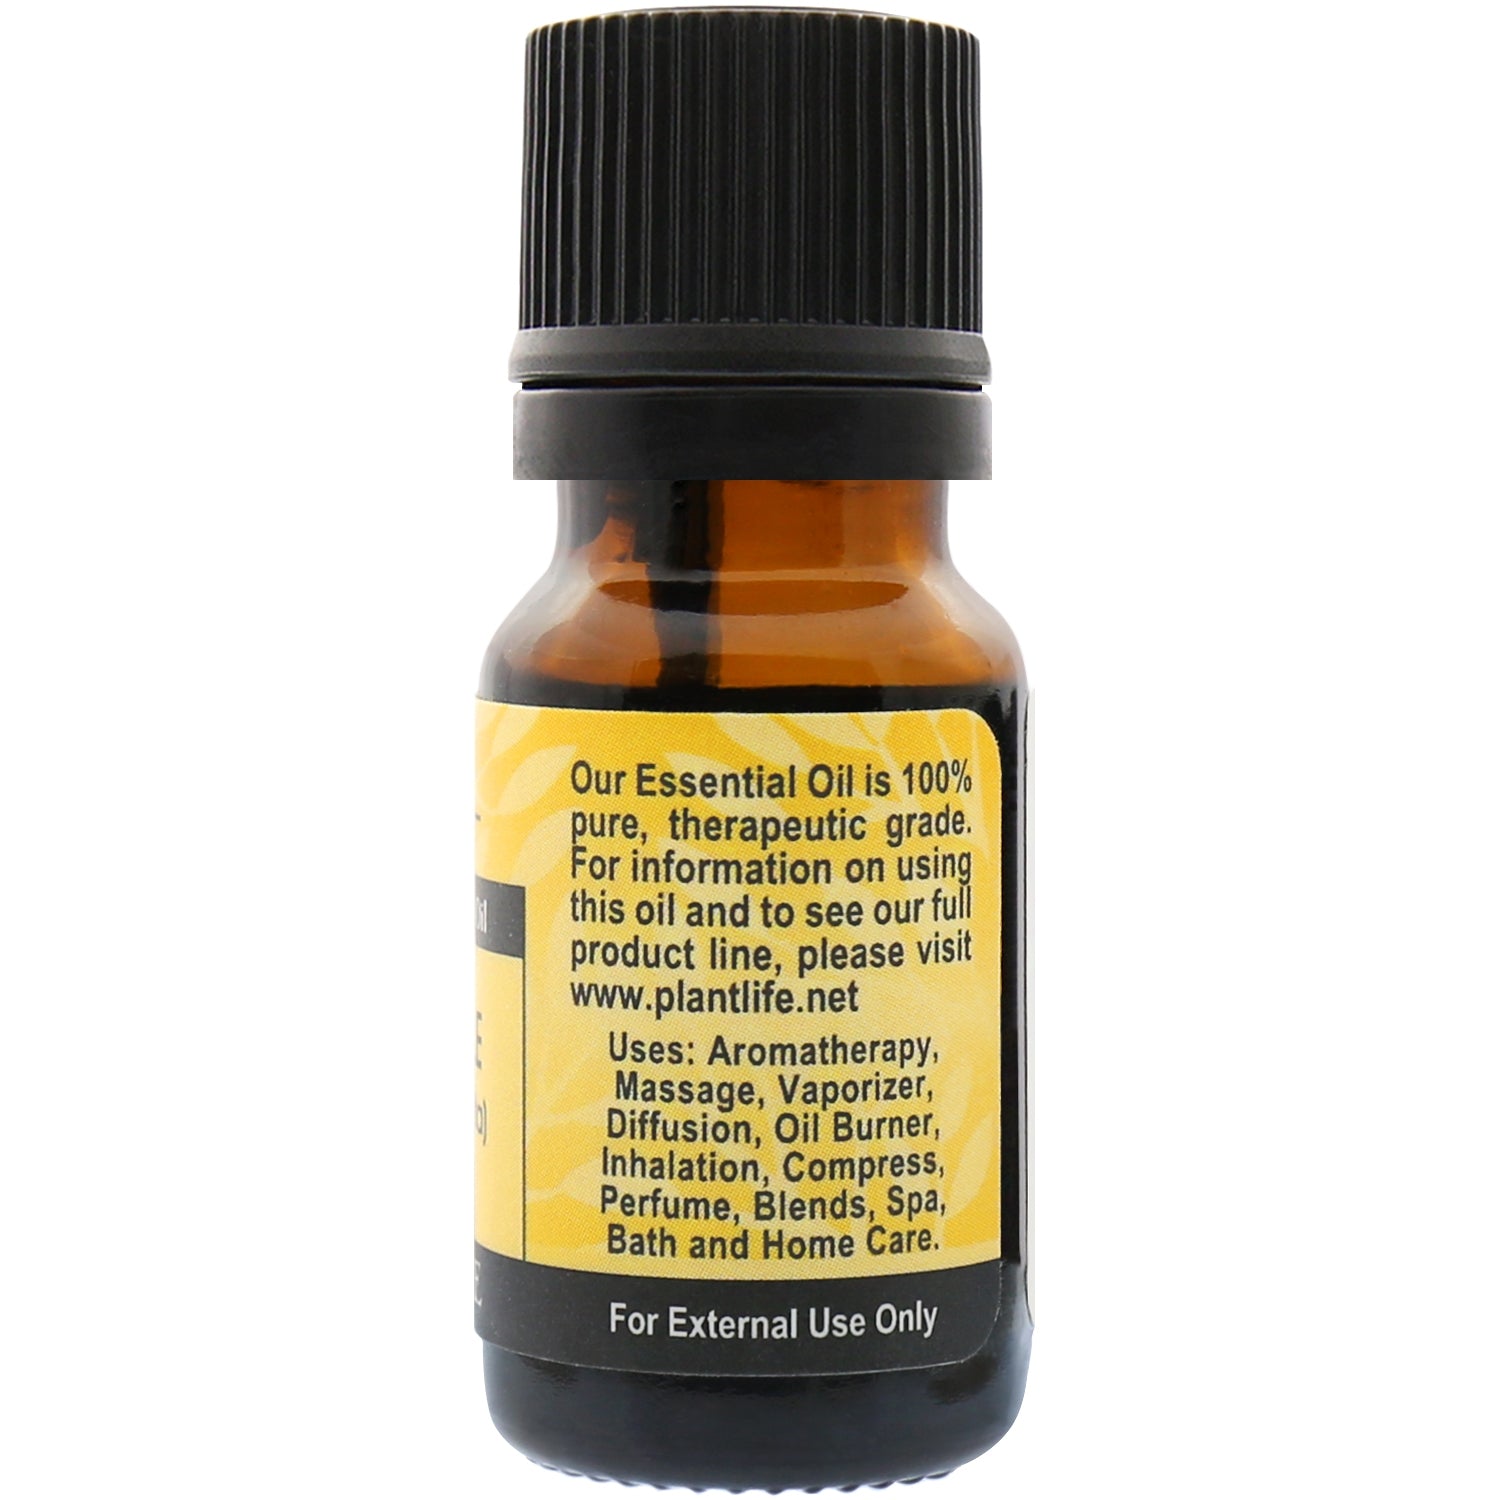 Plant Therapy HO Wood Essential Oil 10 ml (1/3 oz) 100% Pure Undiluted Therapeutic Grade